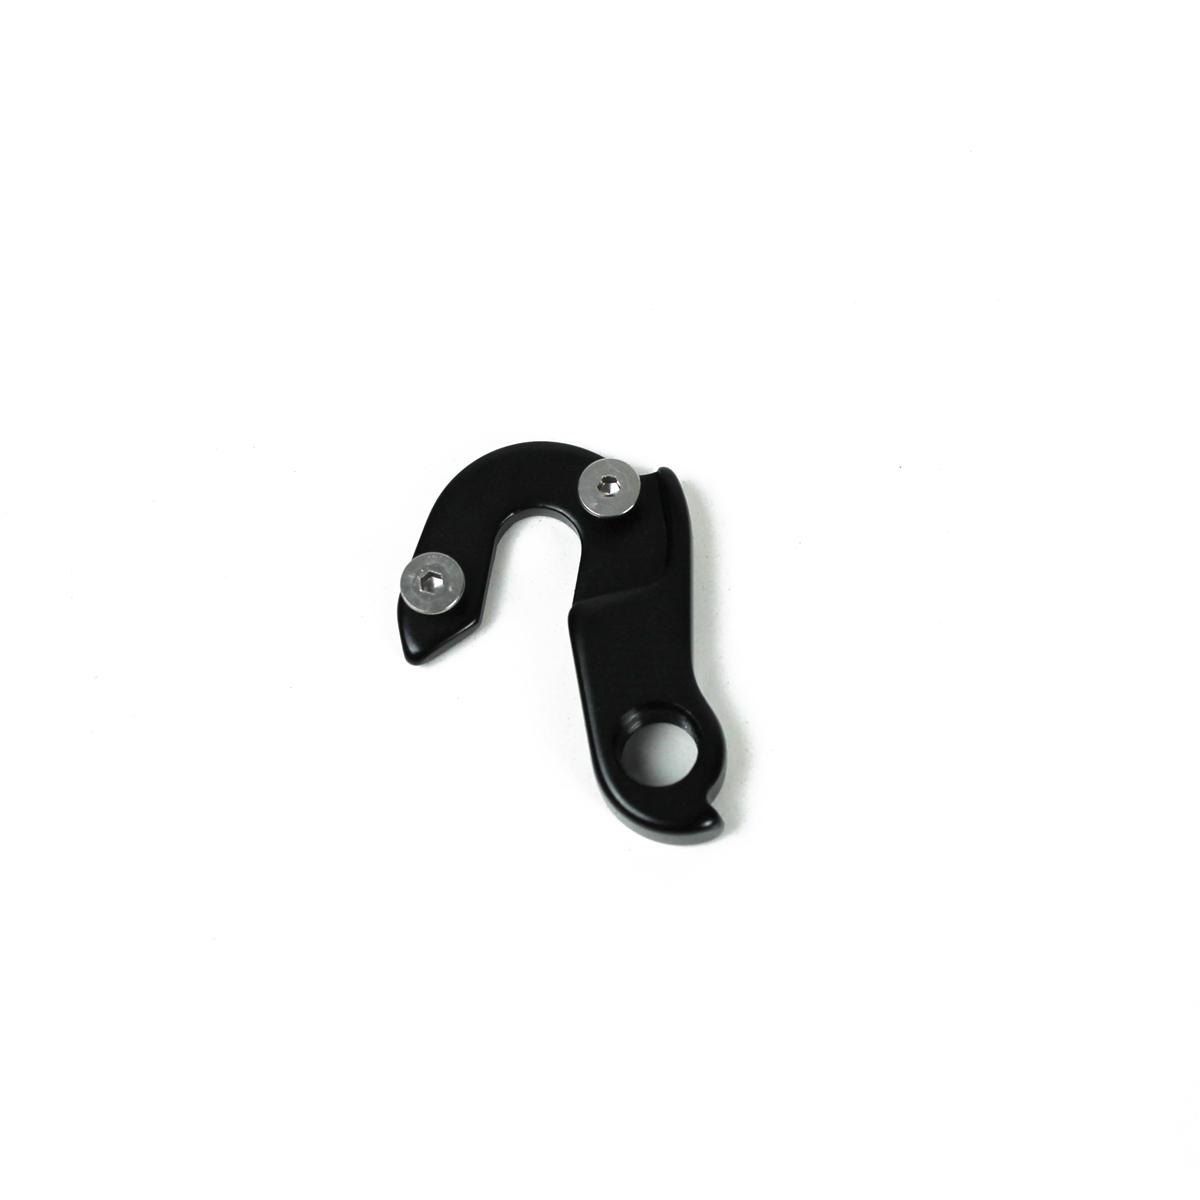 Derailleur hanger for LC and GT models